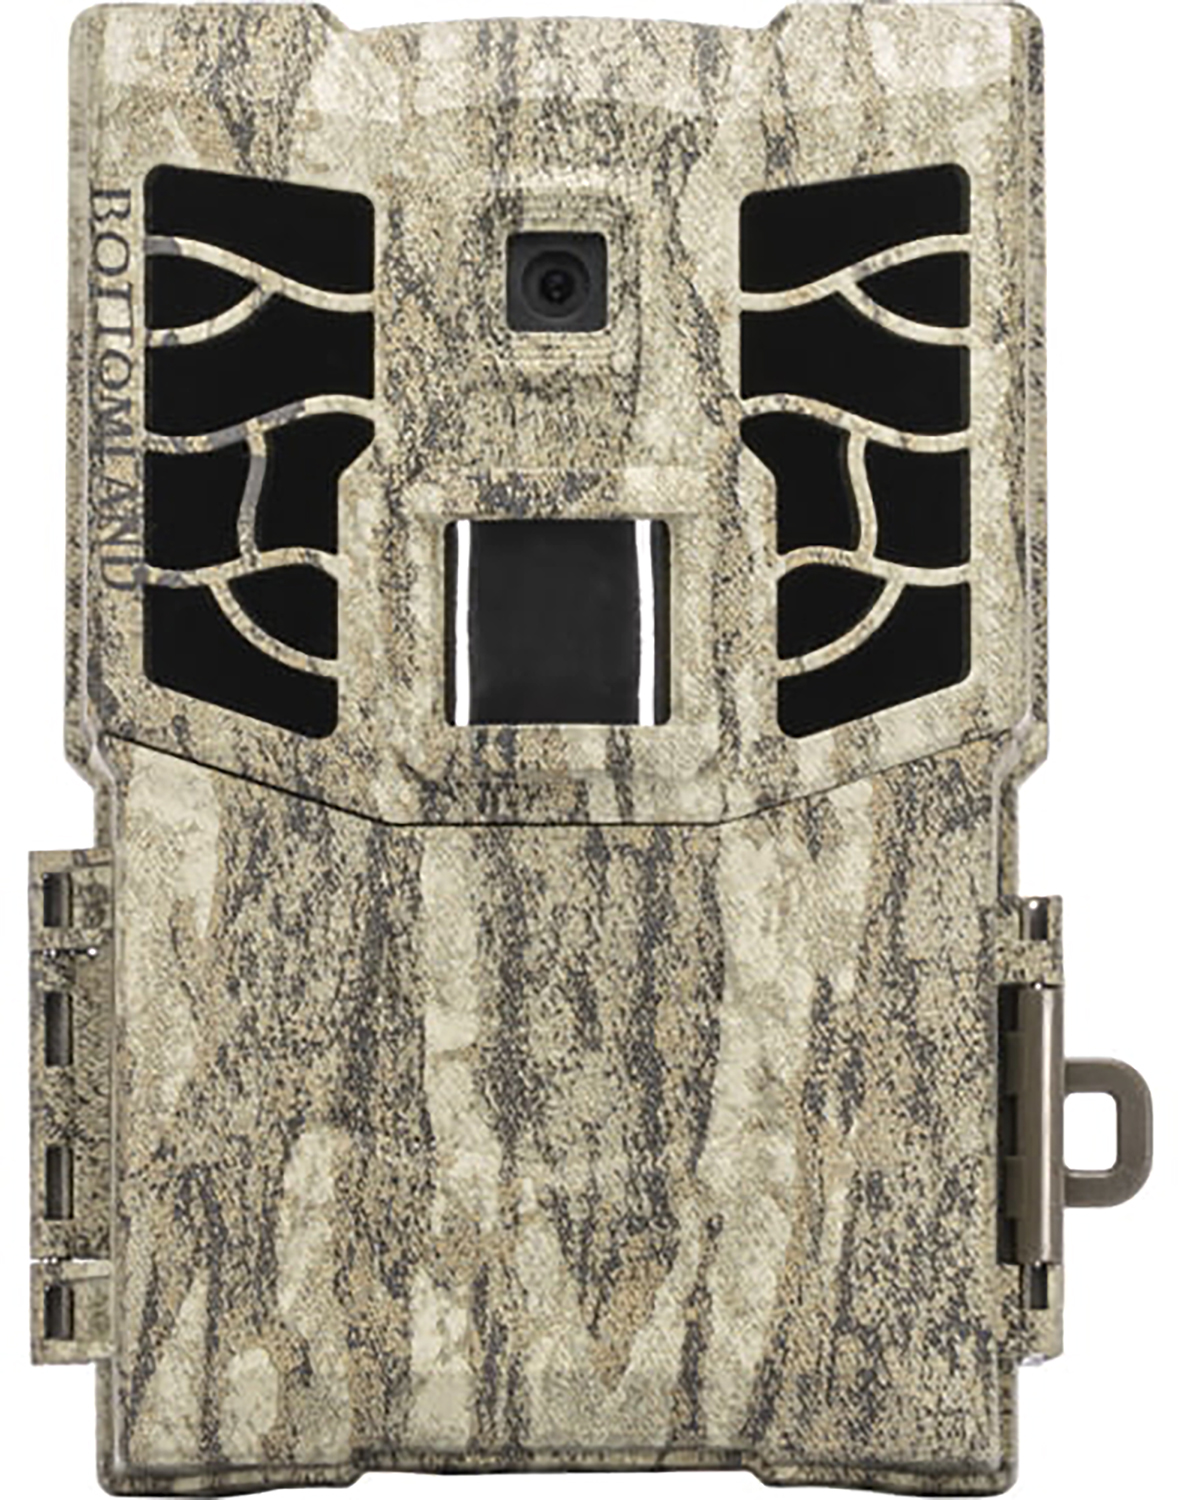 Covert Scouting Cameras CC8021 MP32  Mossy Oak Bottomlands 1.50